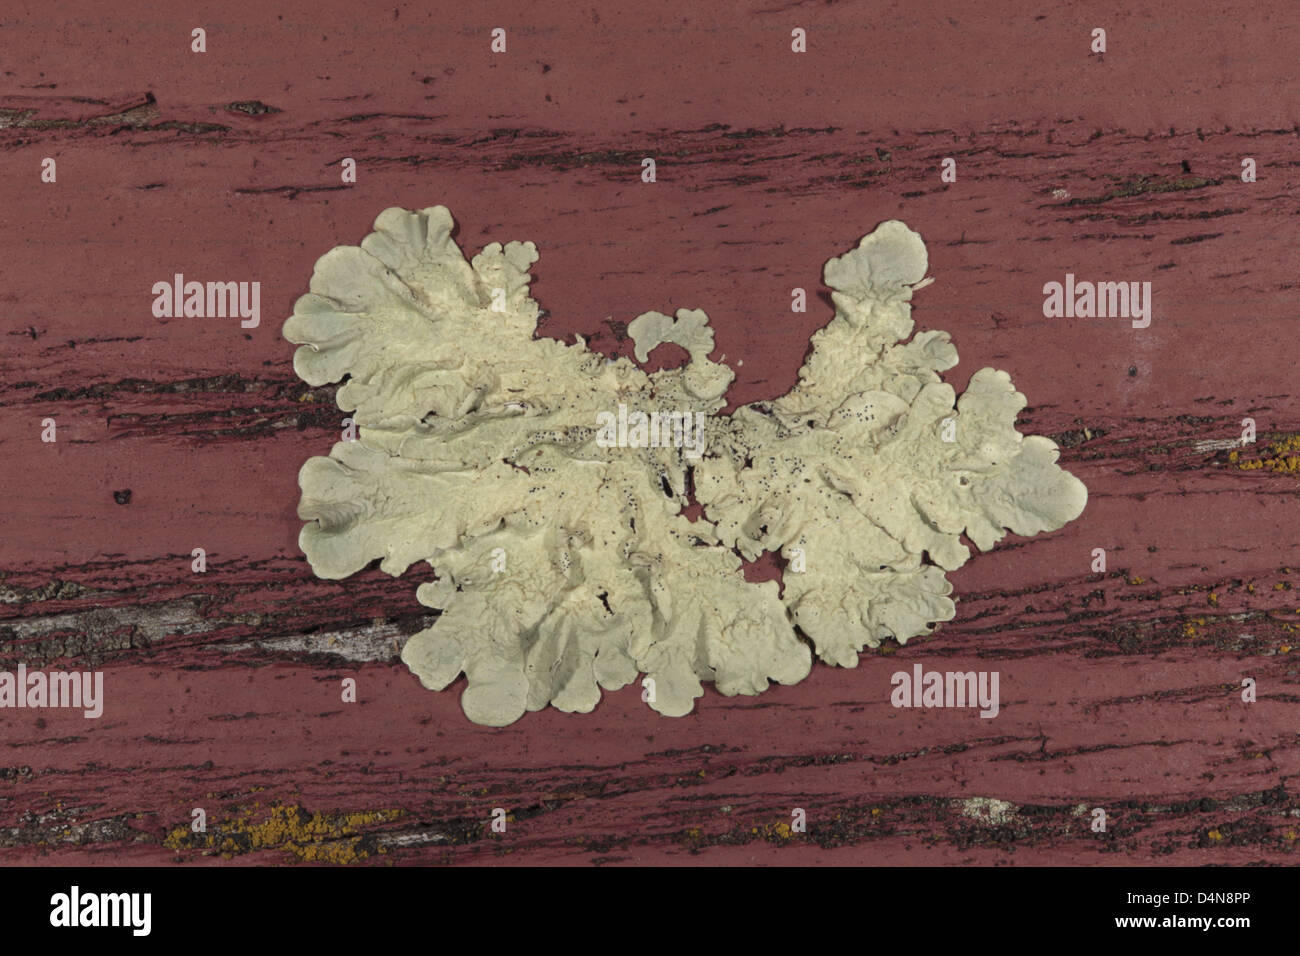 Lichen of the species Xanthoparmelia growing on rotting wooden plank- Family Parmeliaceae Stock Photo